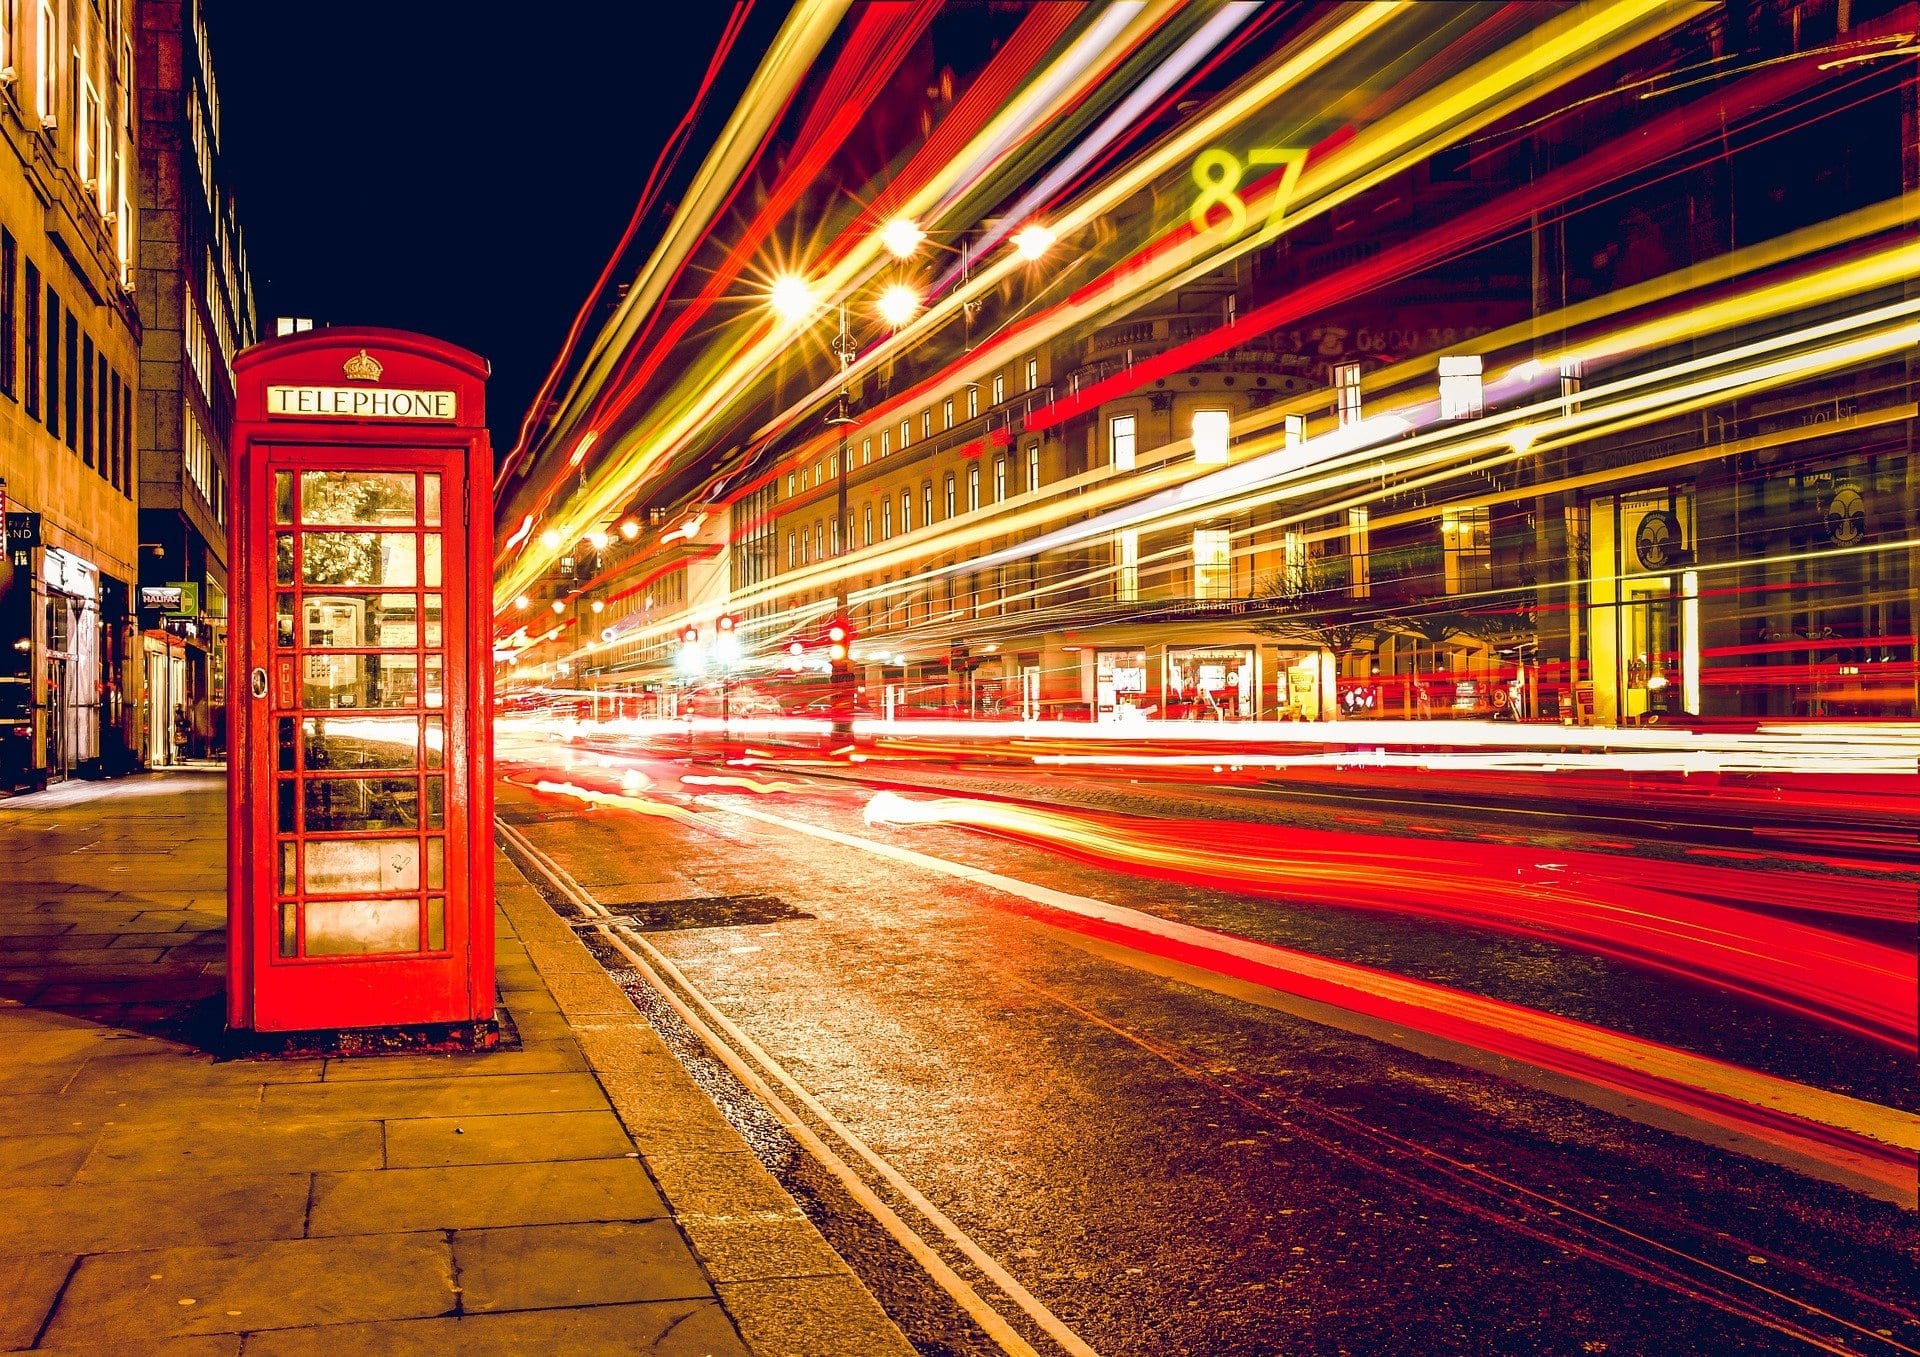 commercial street at night with telephone booth